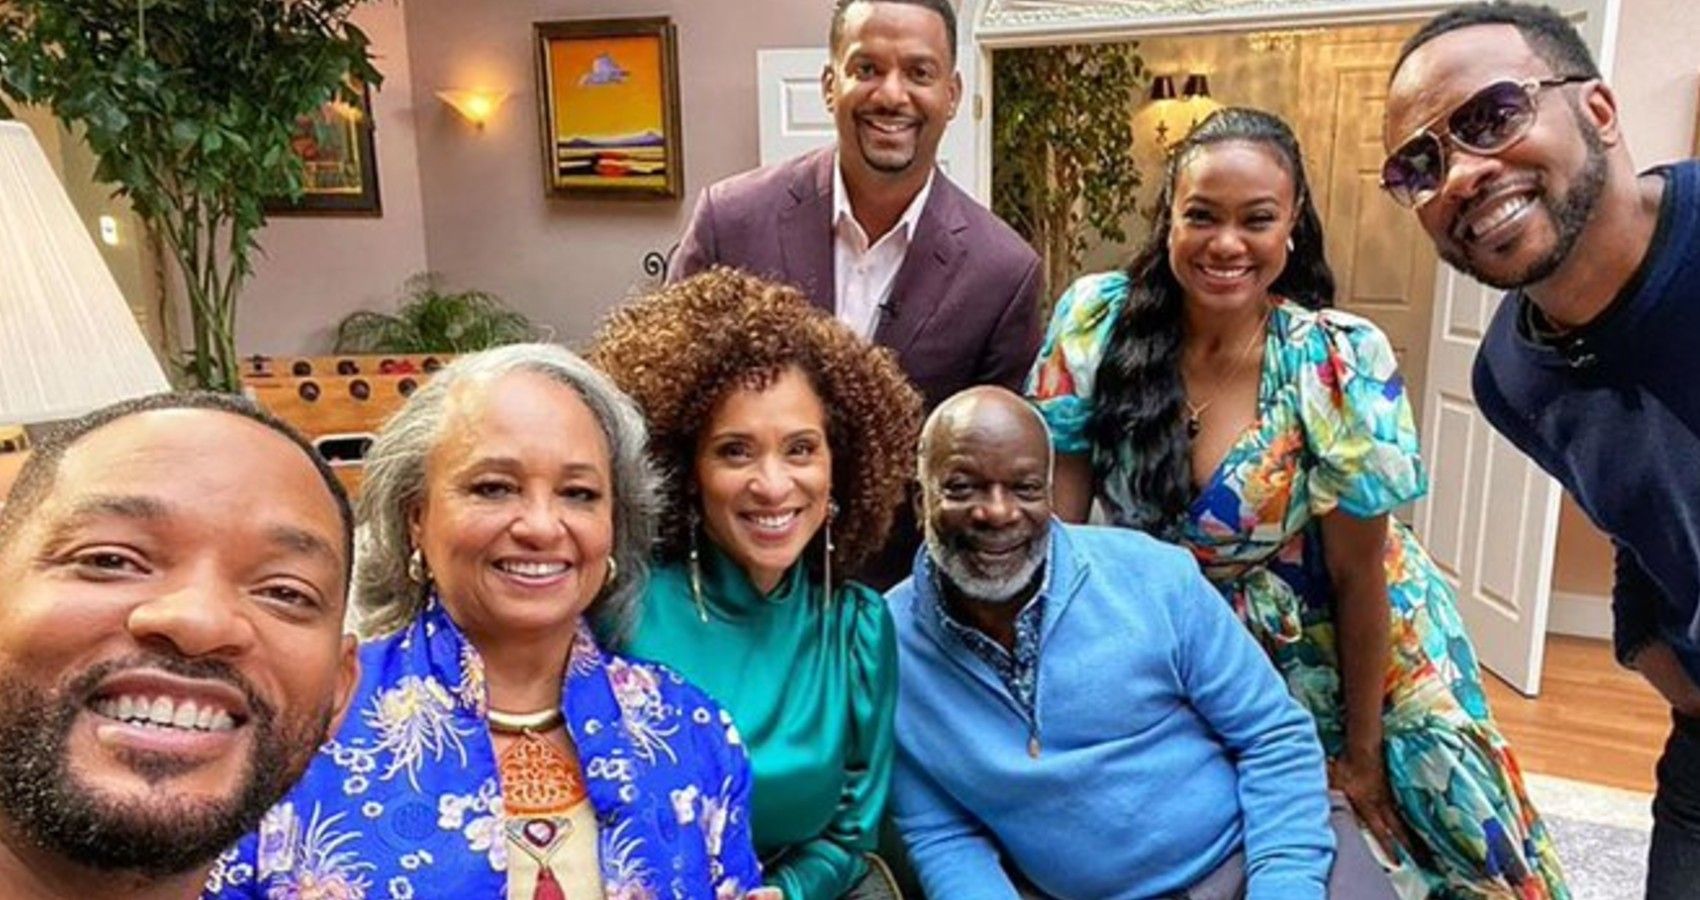 A selfie of the cast of Fresh Prince of Bel-Air ahead of reunion special